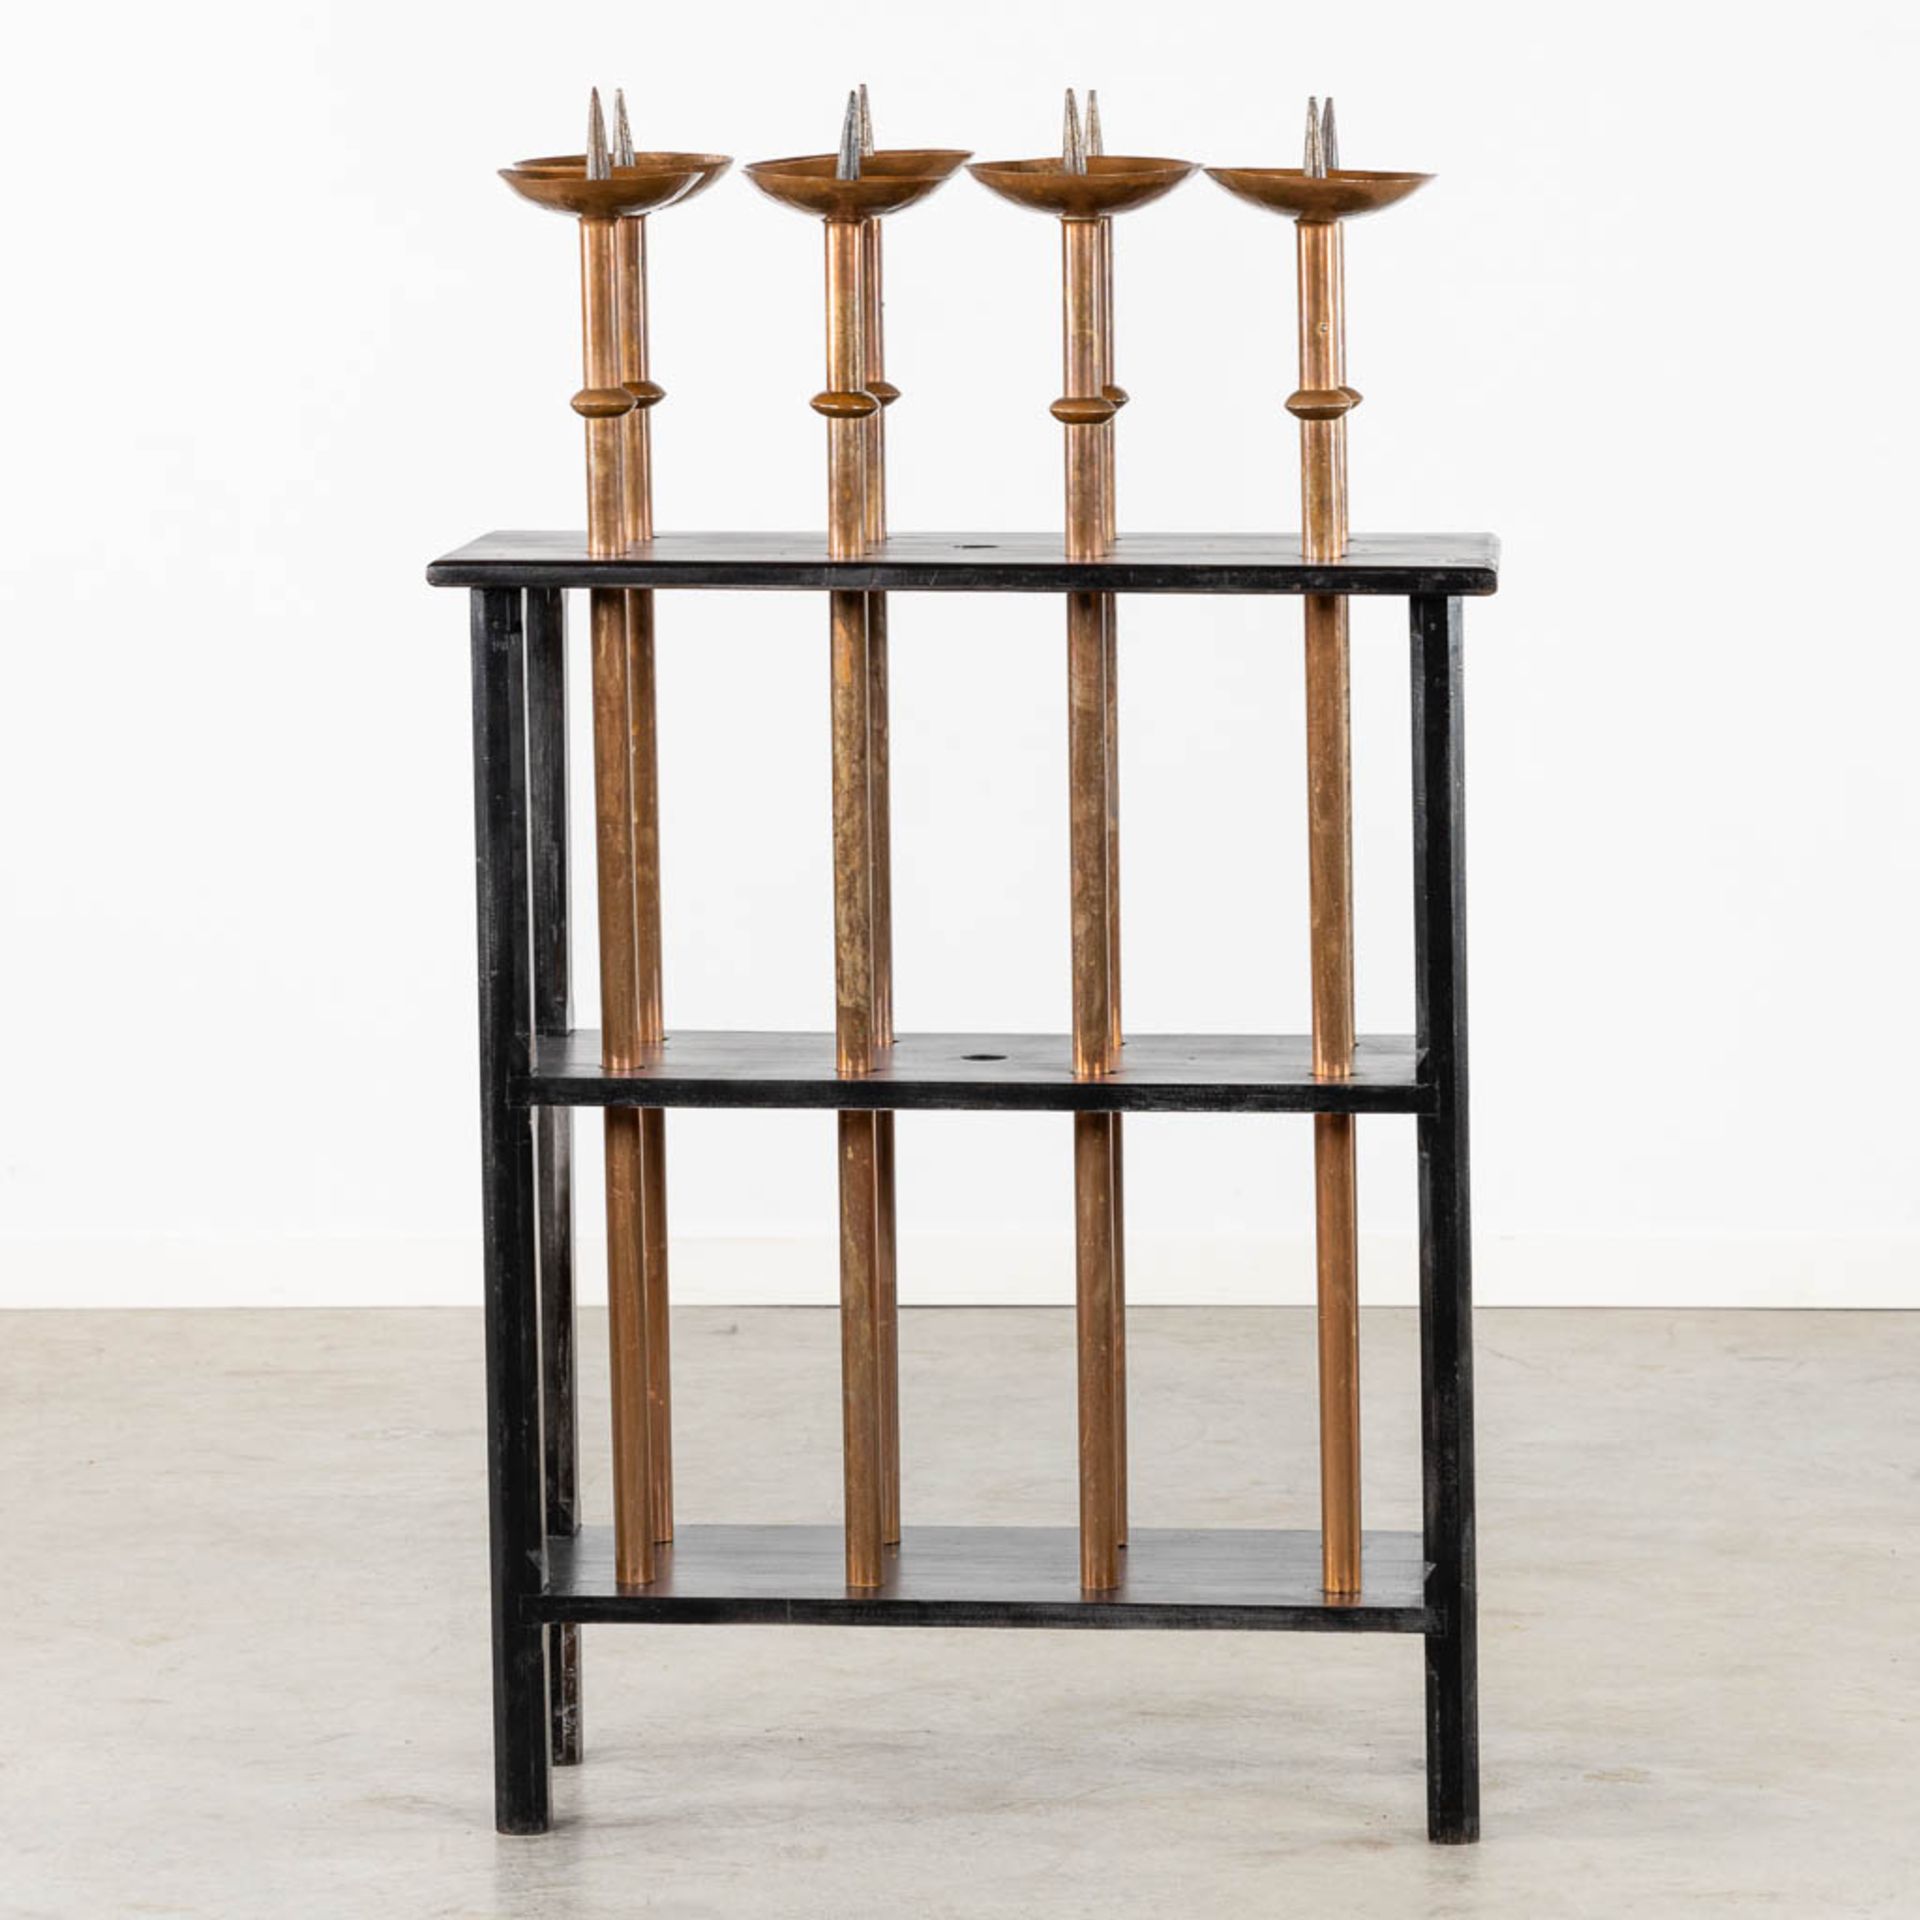 A set of 8 processional candelabra in a wood stand. (L:36 x W:75 x H:124 cm) - Image 3 of 8